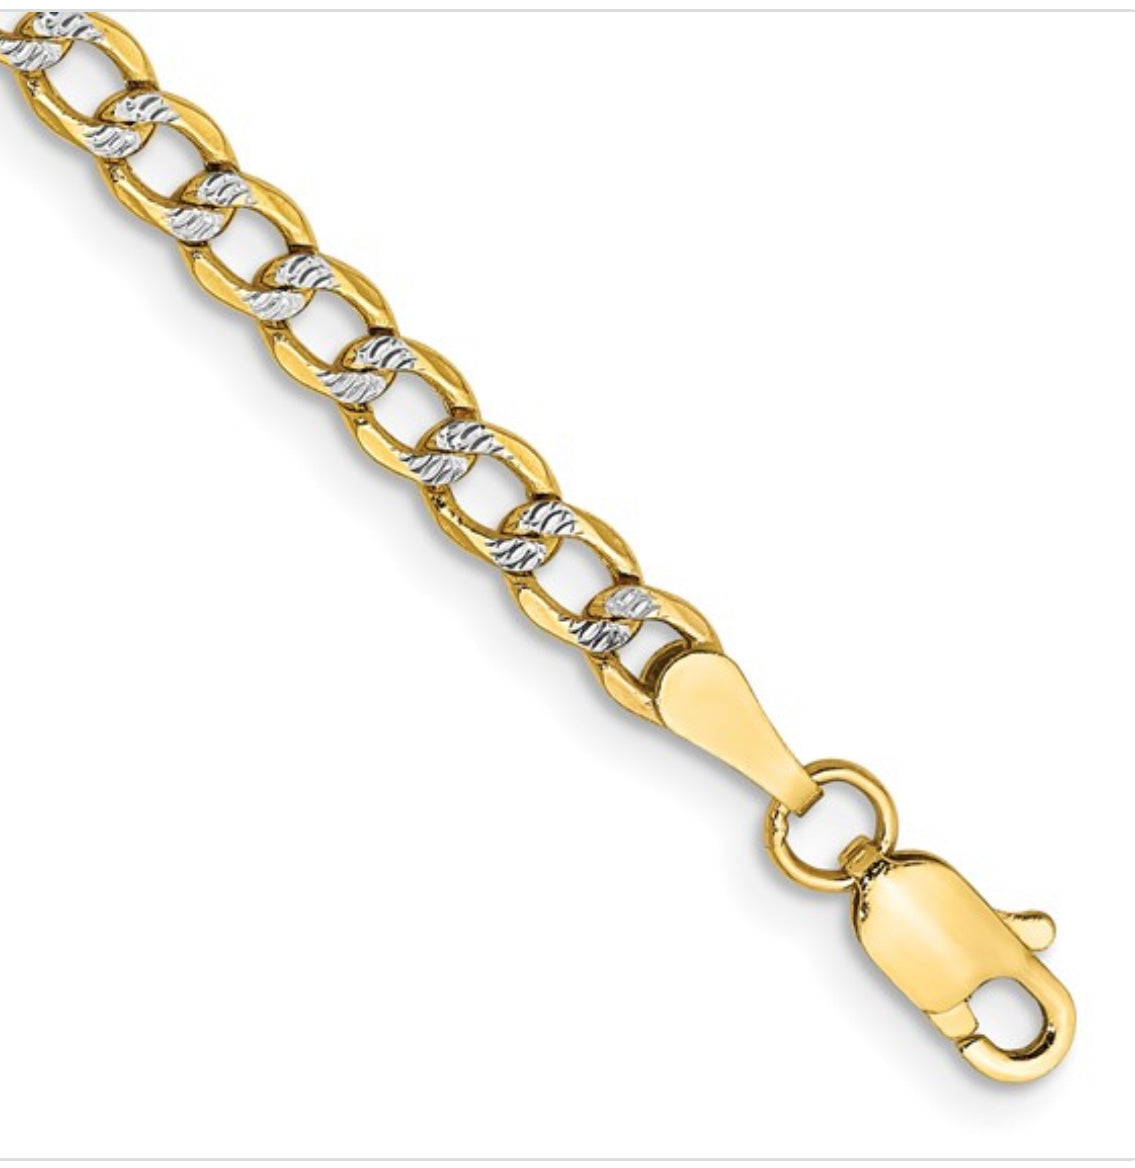 14K Yellow Gold and Rhodium Plated Pave Curb Chain - 3.4mm